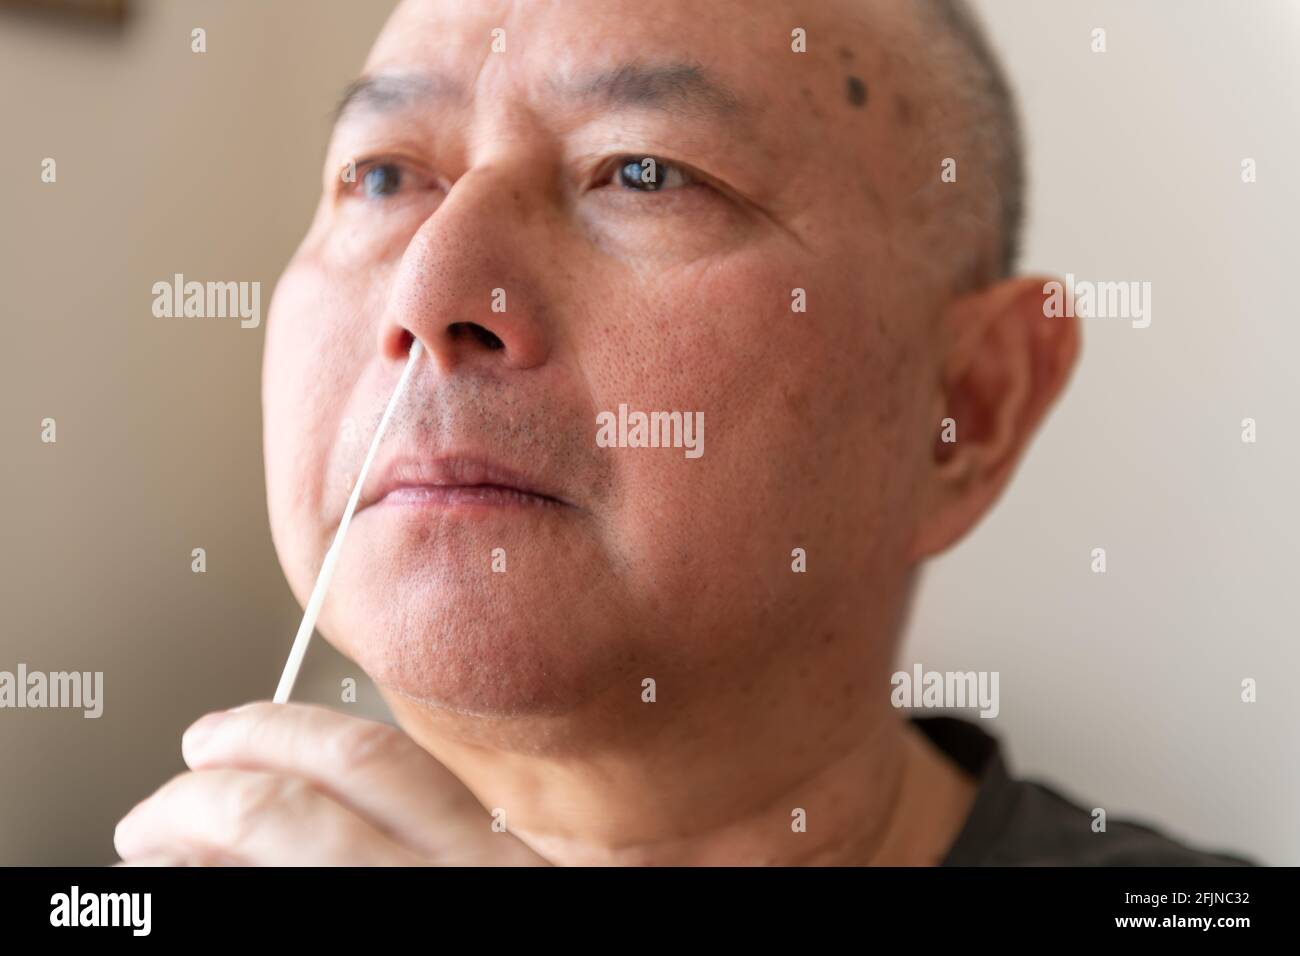 A matured Asian man taking a swab sample carrying out a Covid-19 self home test. Stock Photo